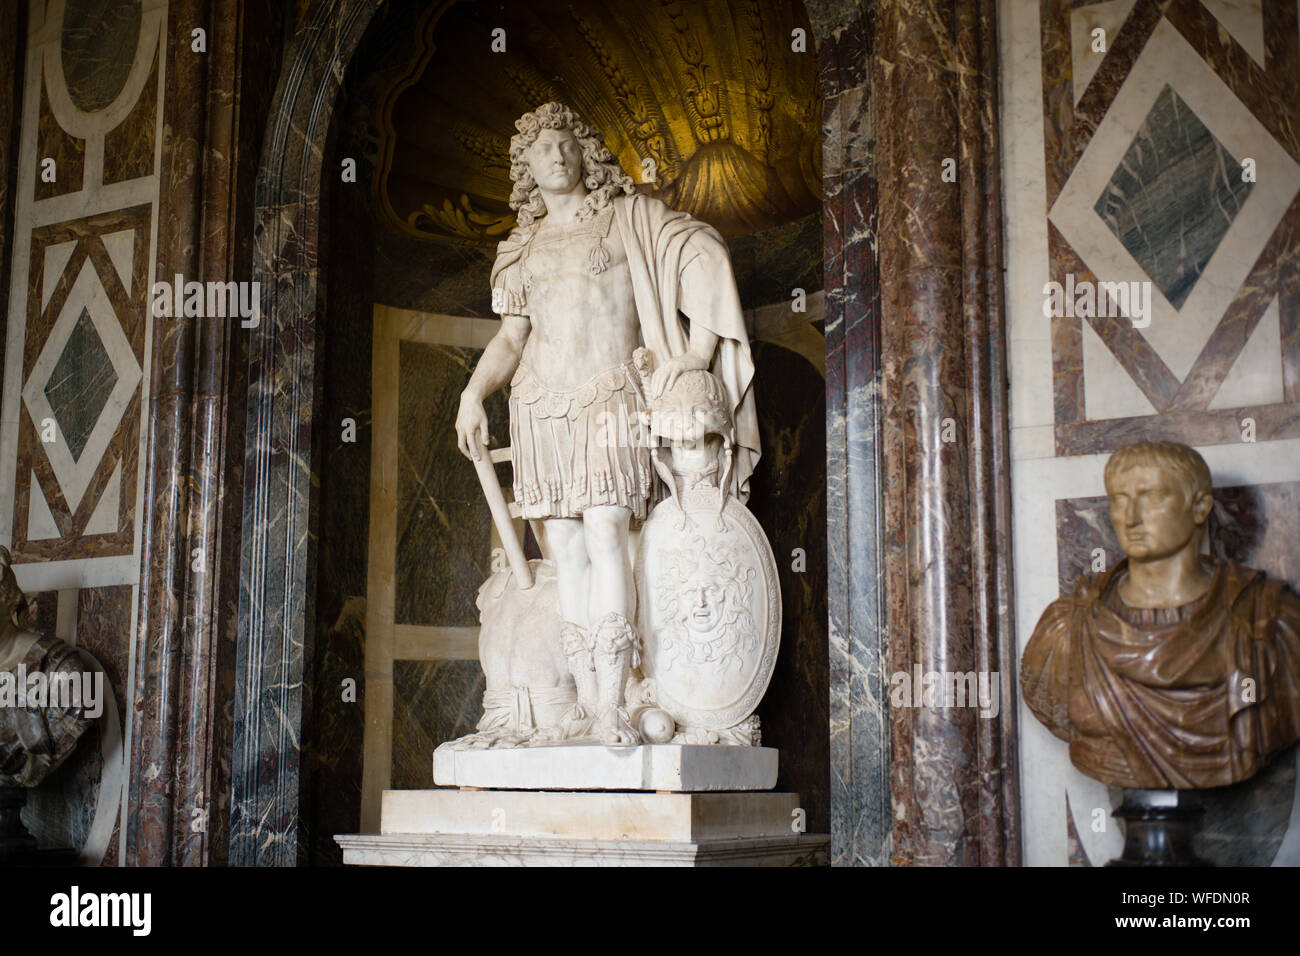 King Louis statue, Versailles palace France Stock Photo